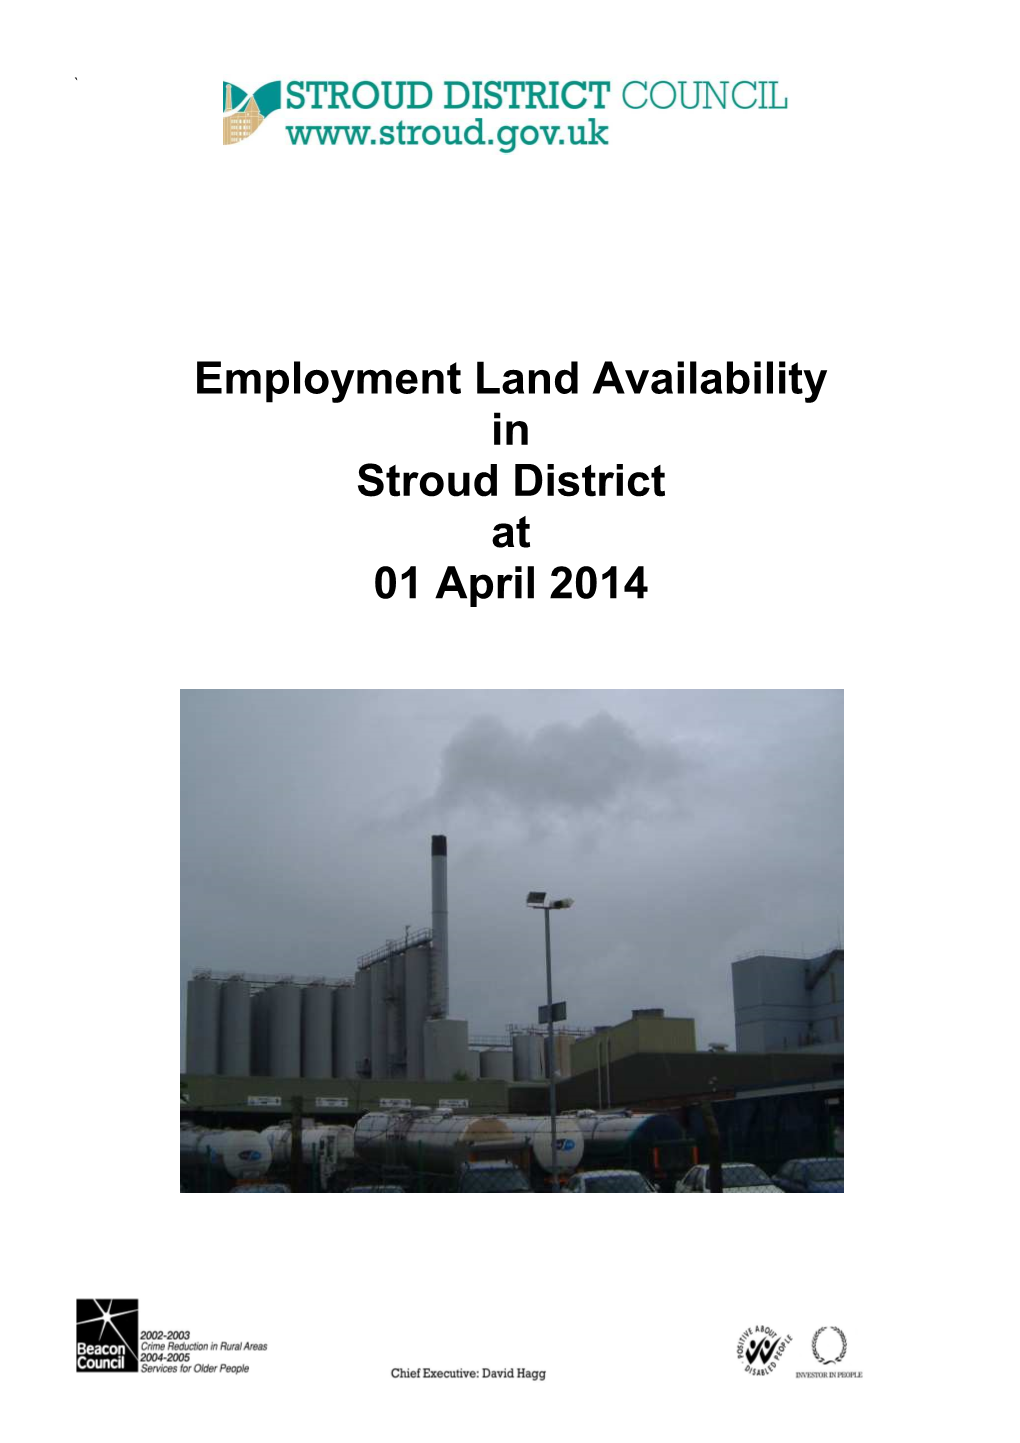 Employment Land Availability in Stroud District at 01 April 2014